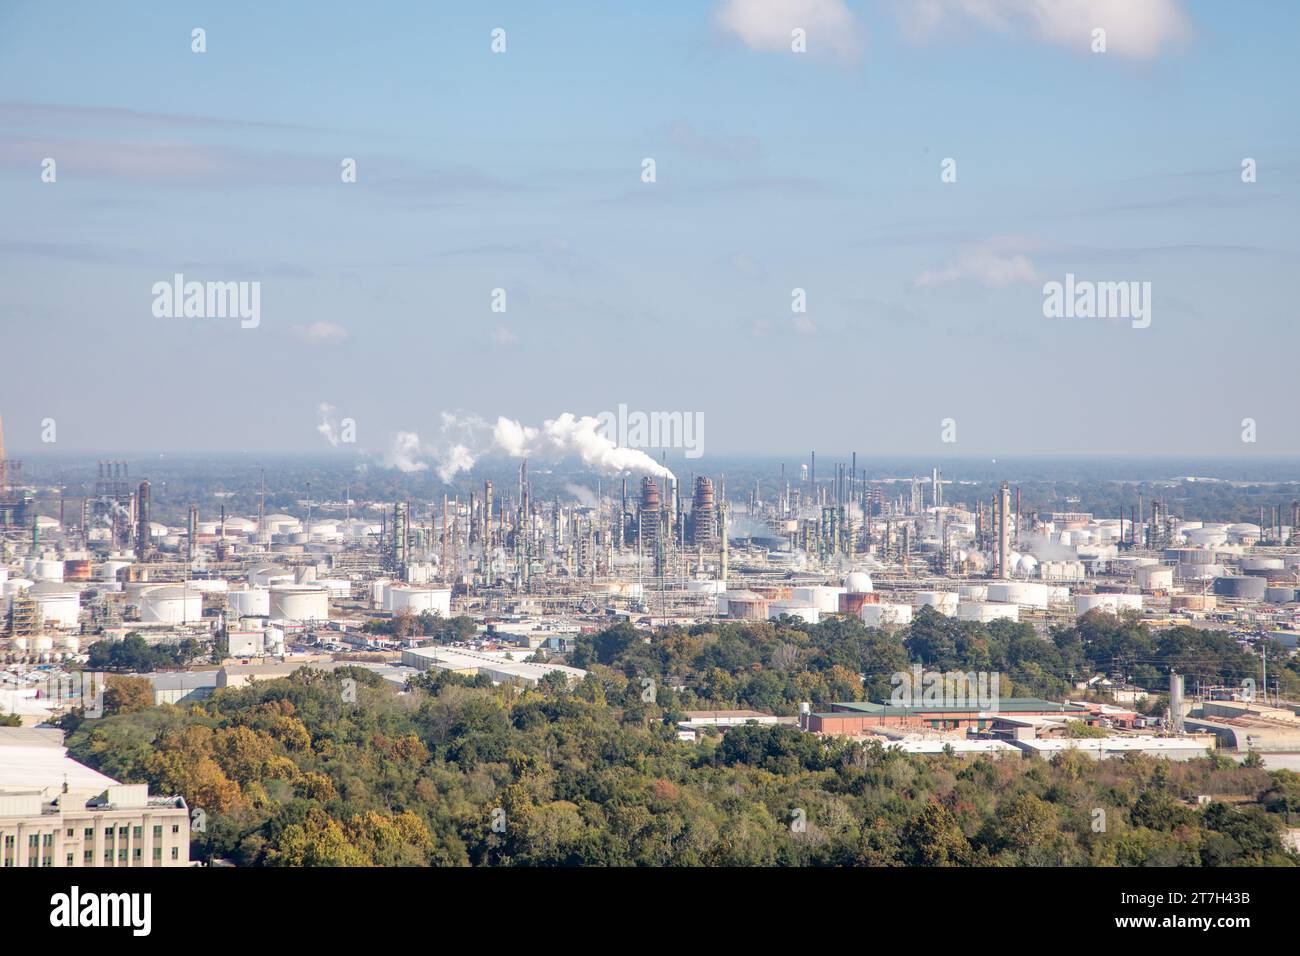 aerial of oil industry near Baton Rouge Stock Photo